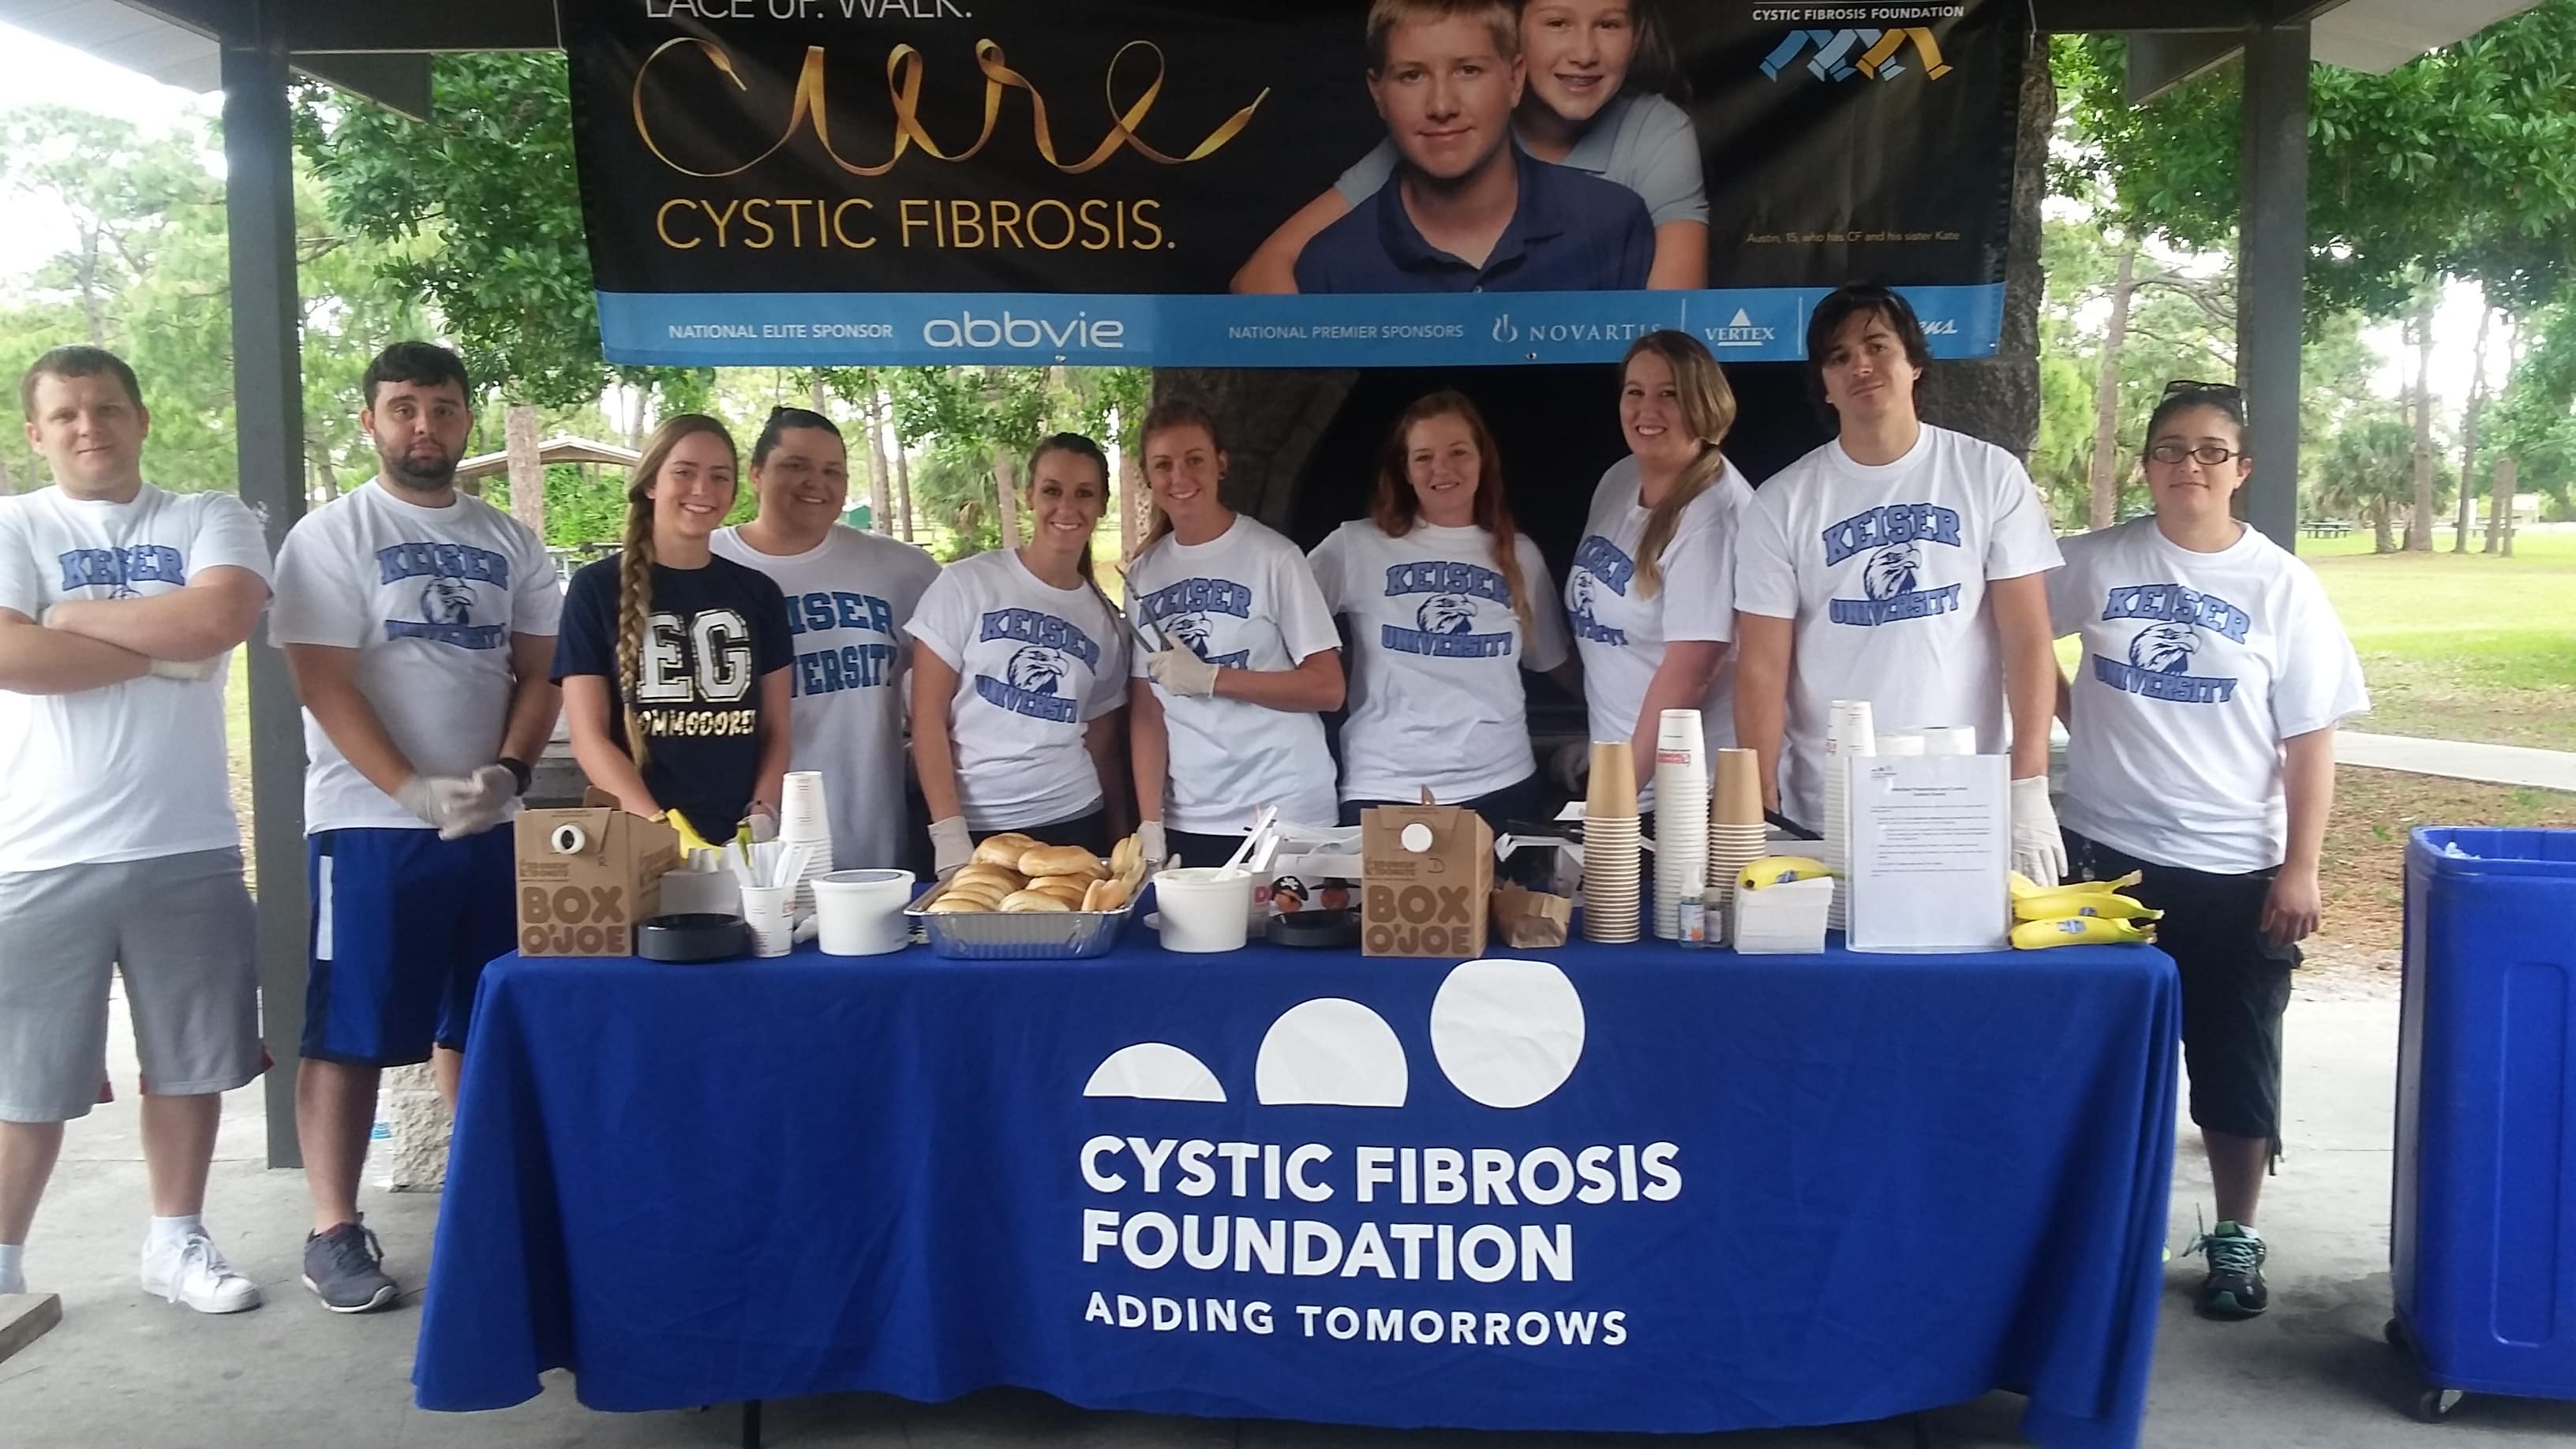 Students from the Melbourne Campus Participate in Great Strides Walk for Cystic Fibrosis Foundation